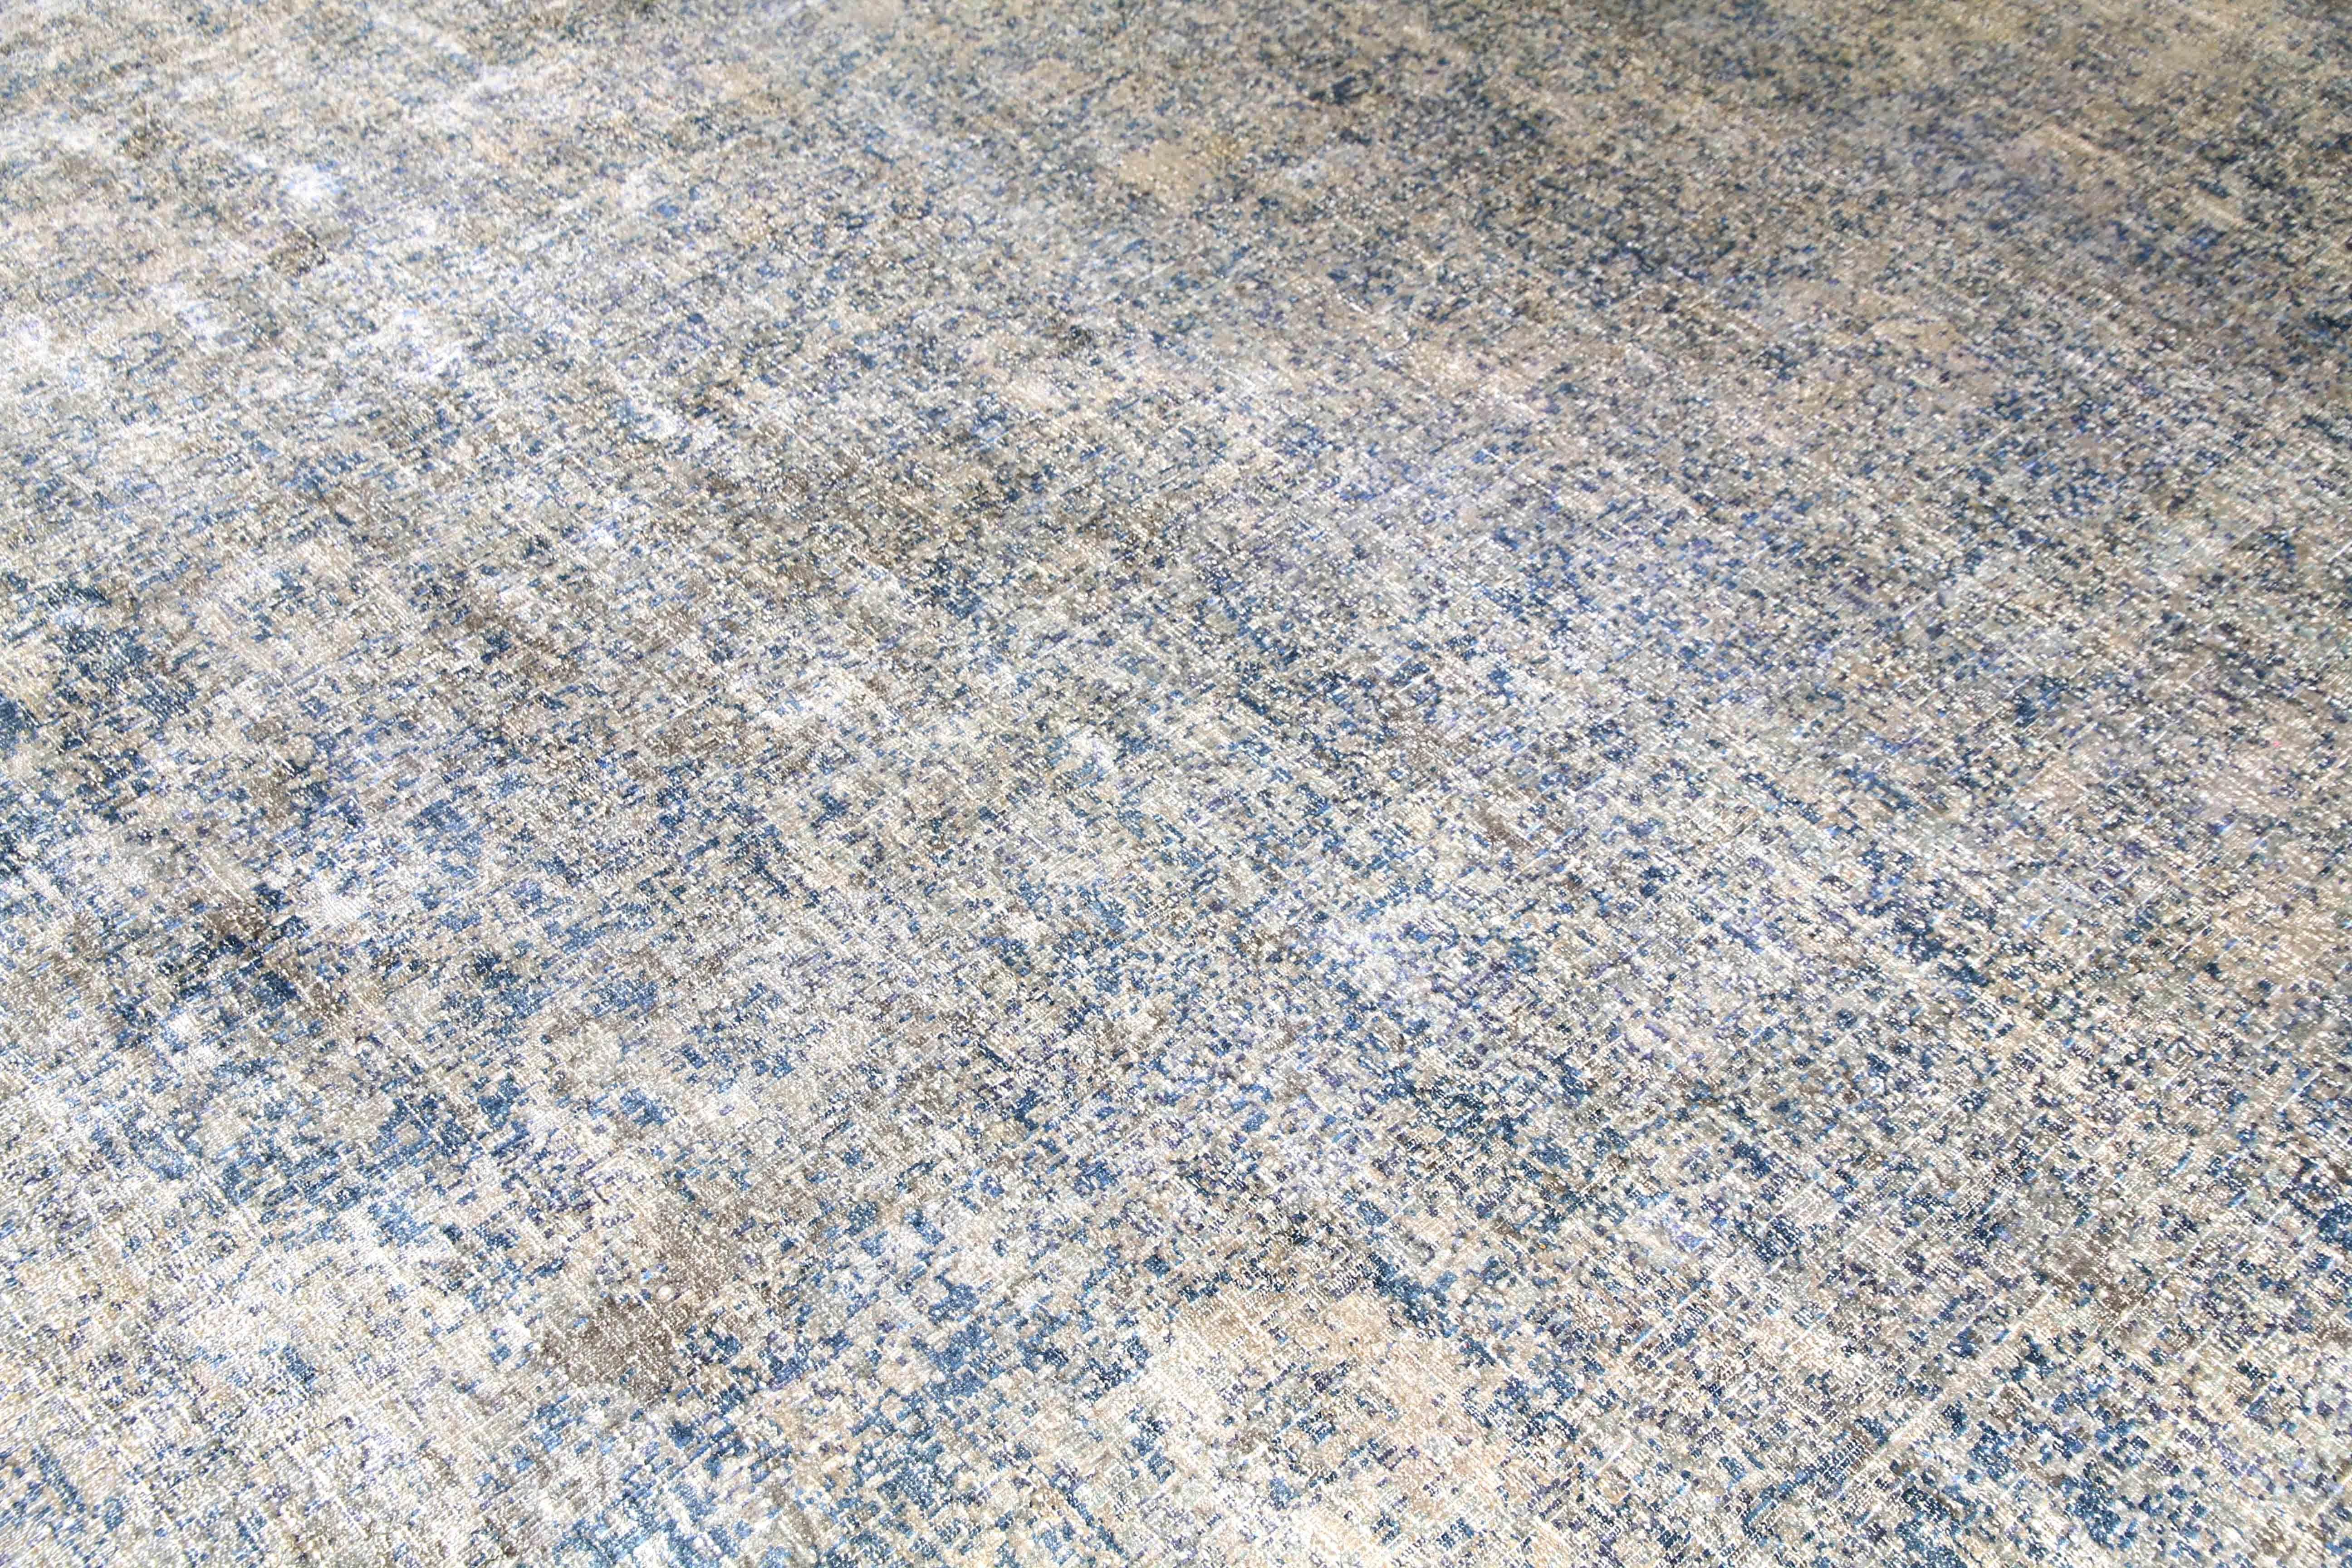 This hand-knotted rug is an exhibit of an exceptionally reductive method that harnesses the natural texture of color to bring out hidden tonalities and textures underneath the foundation of the rug. A distressed finish is revealed with